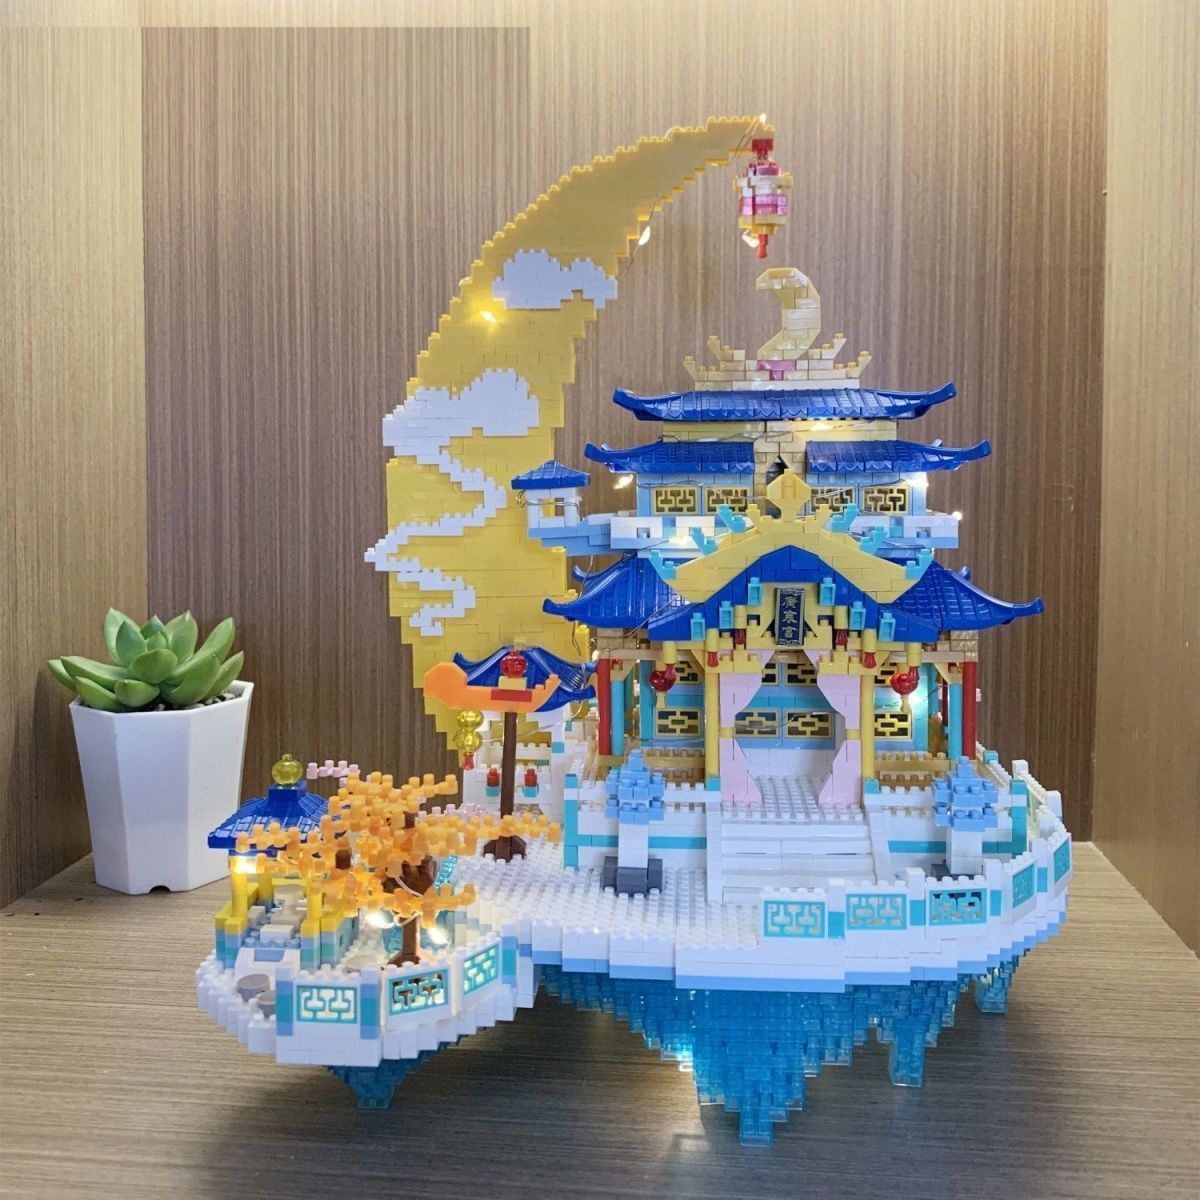 Compatible with Lego Building Blocks Guanghan Palace Building Series Girls Adult Difficult Large Assembled Toys Birthday Gift